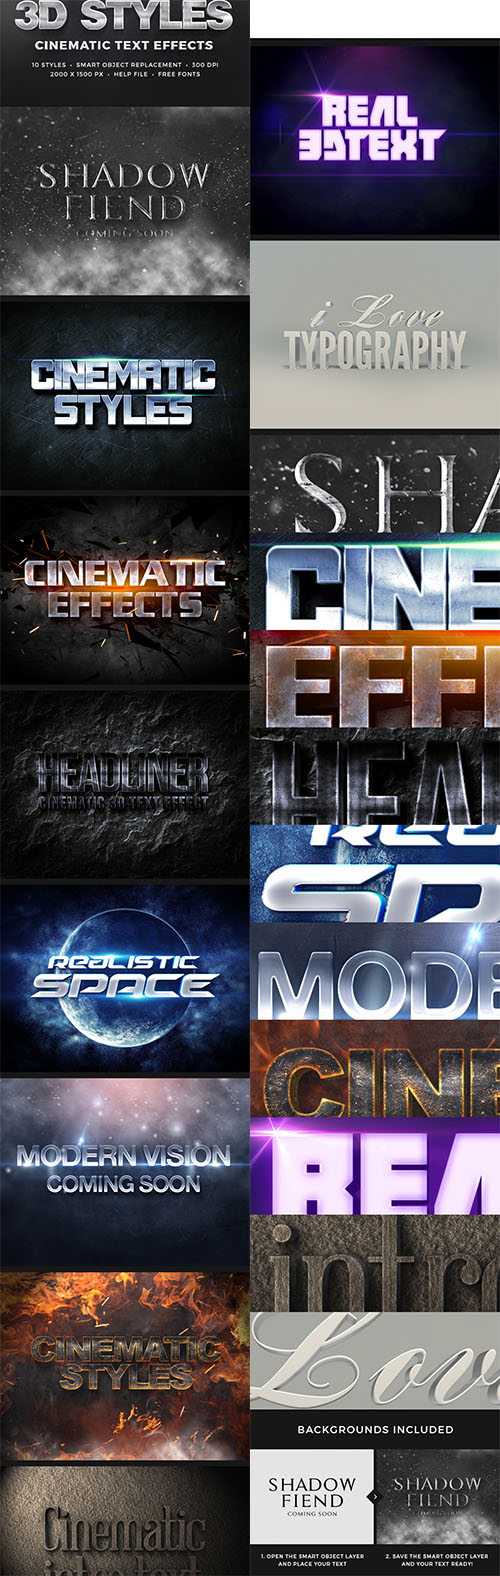 GraphicRiver - 3D Cinematic Text Effects Vol.1 11031893